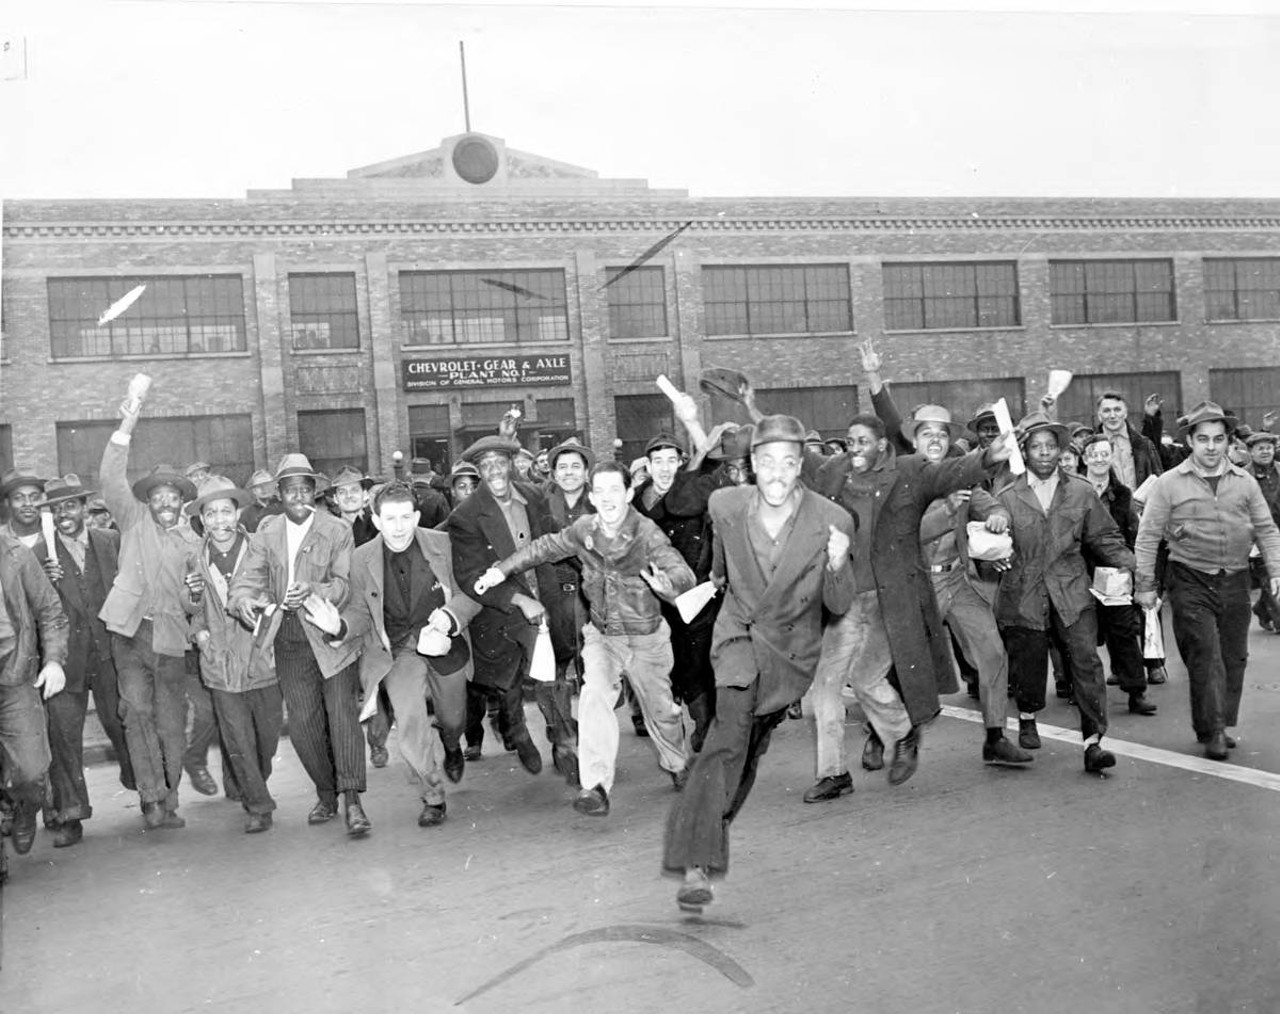 
Nov. 21, 1945: A group of men run from the Chevrolet Gear and Axle plant in Detroit as the UAW-CIO strike against General Motors is launched. The strikers walked, ran, and leaped as they left to begin the walkout, which affected about 100,000 workers in Michigan.